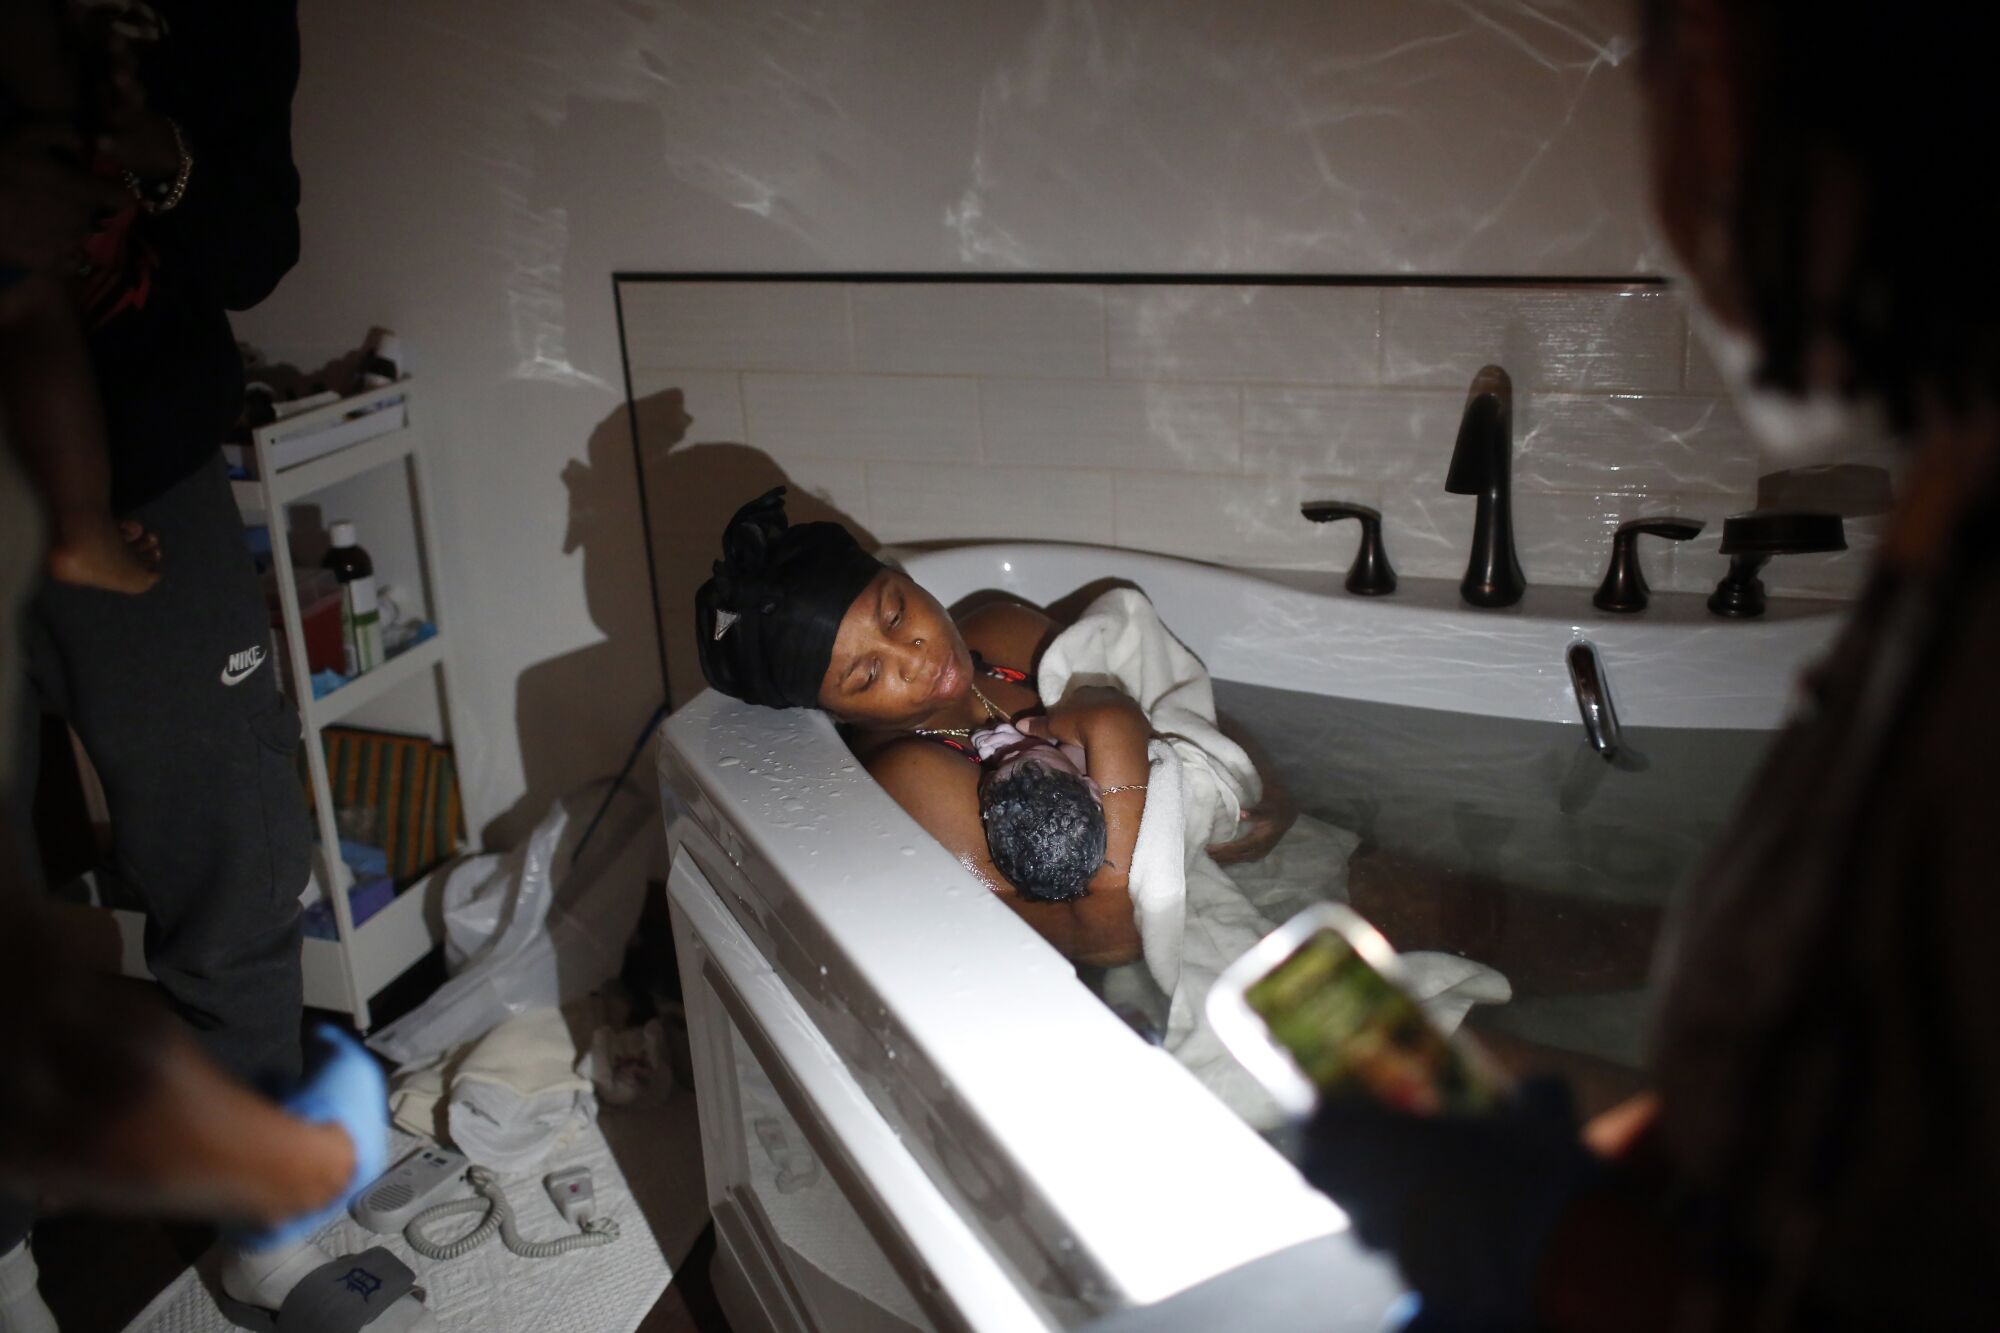 A mother holds her newborn in a tub